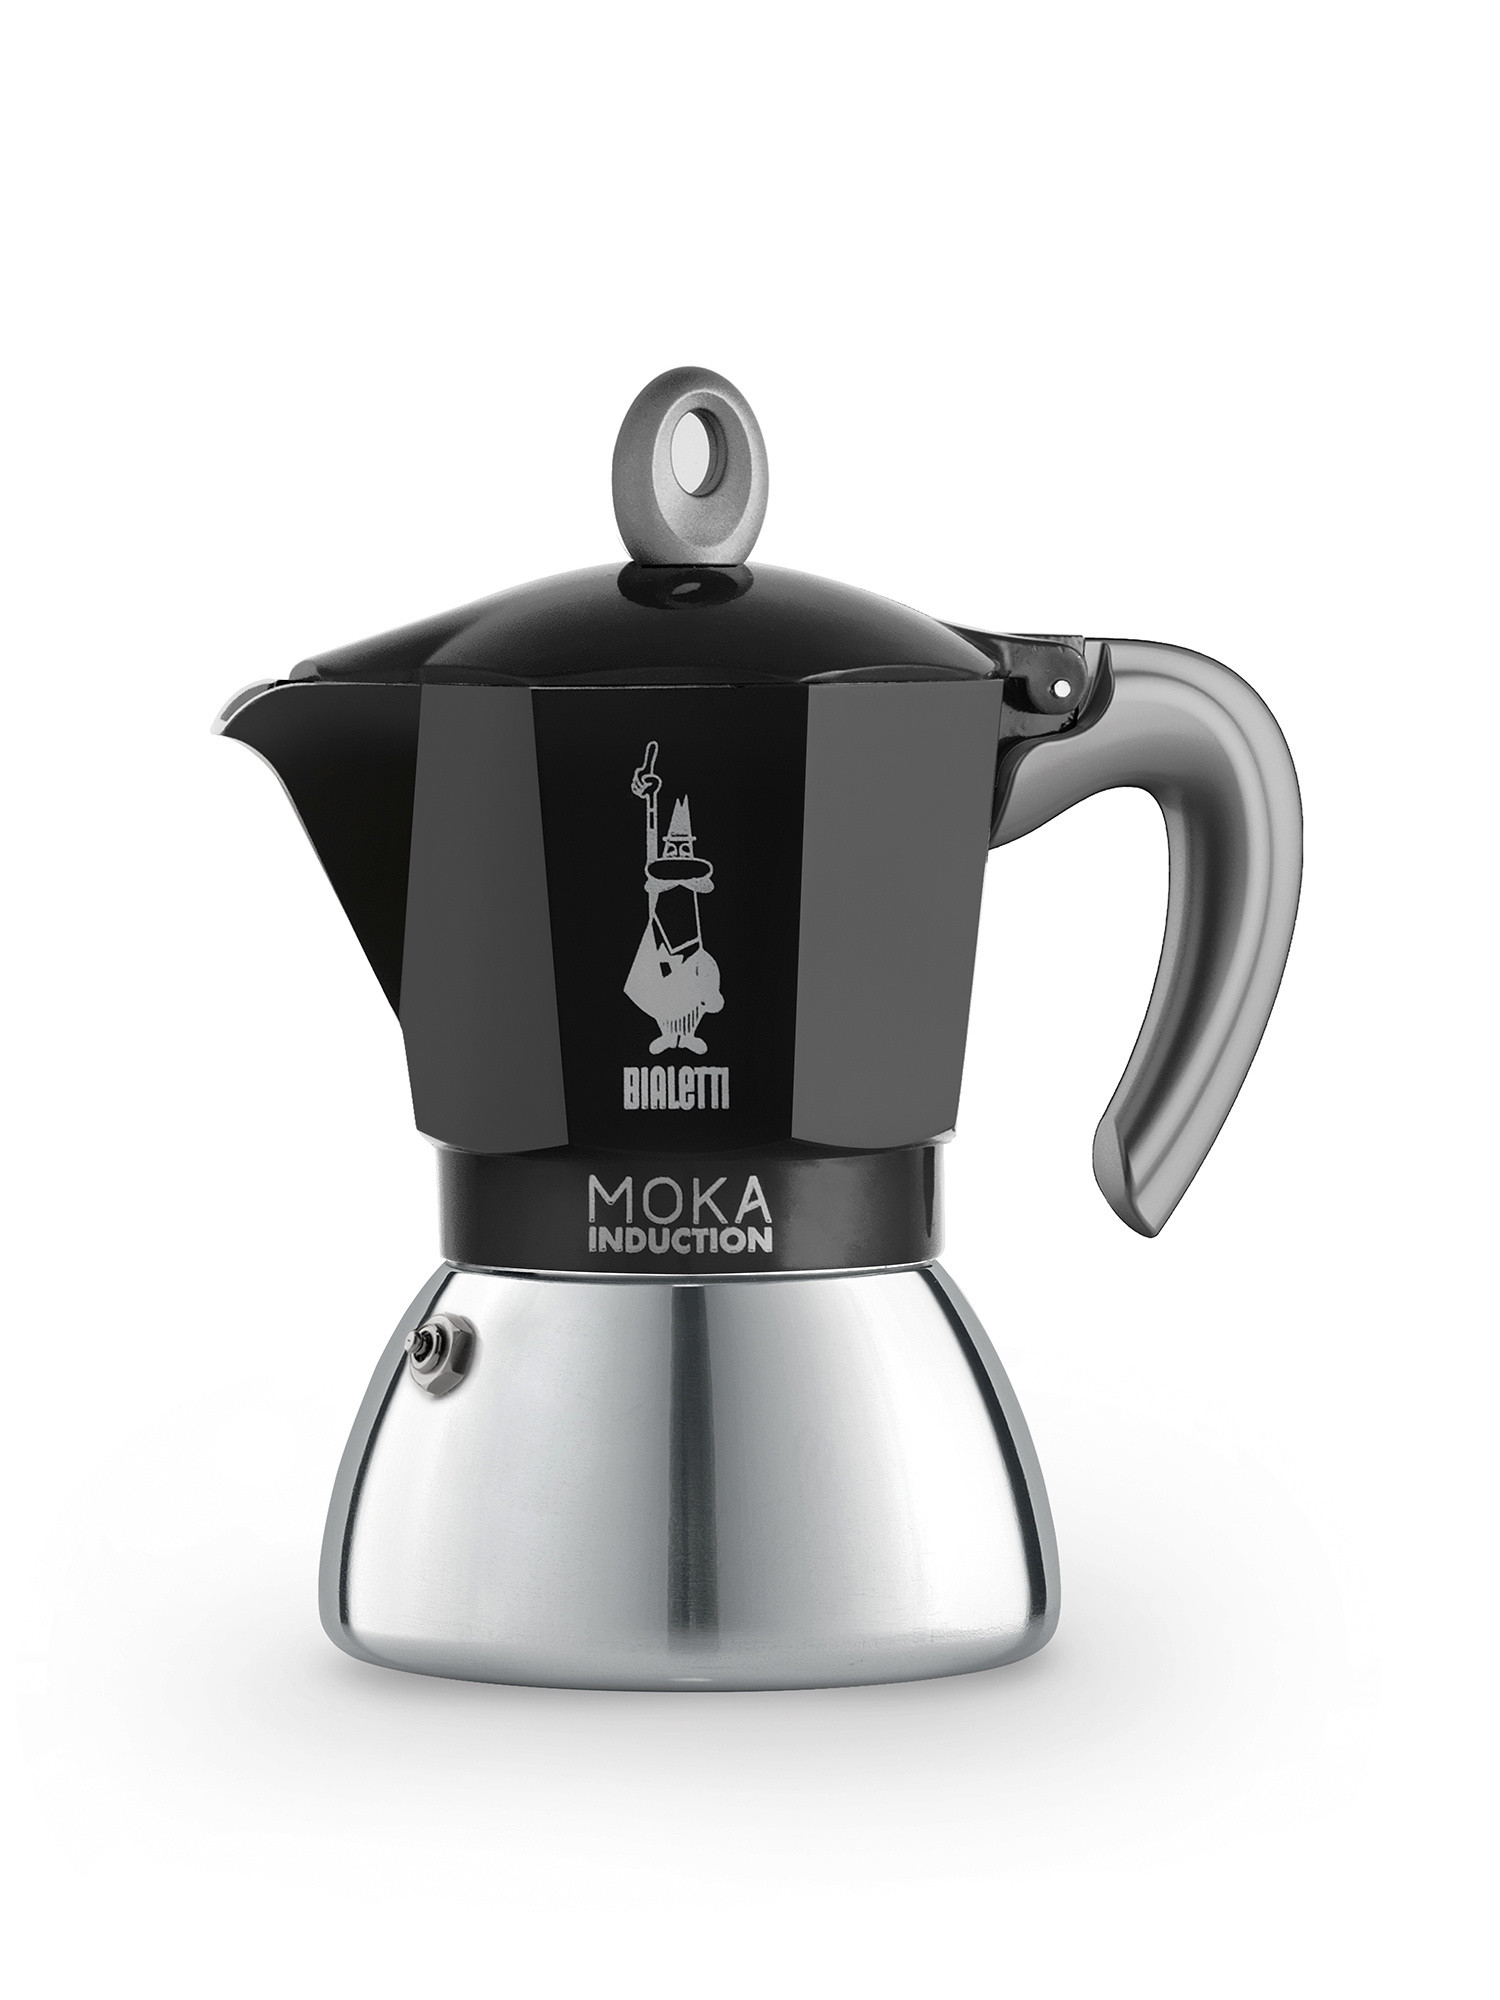 Bialetti - Moka Induction 6 cups, Black, large image number 0